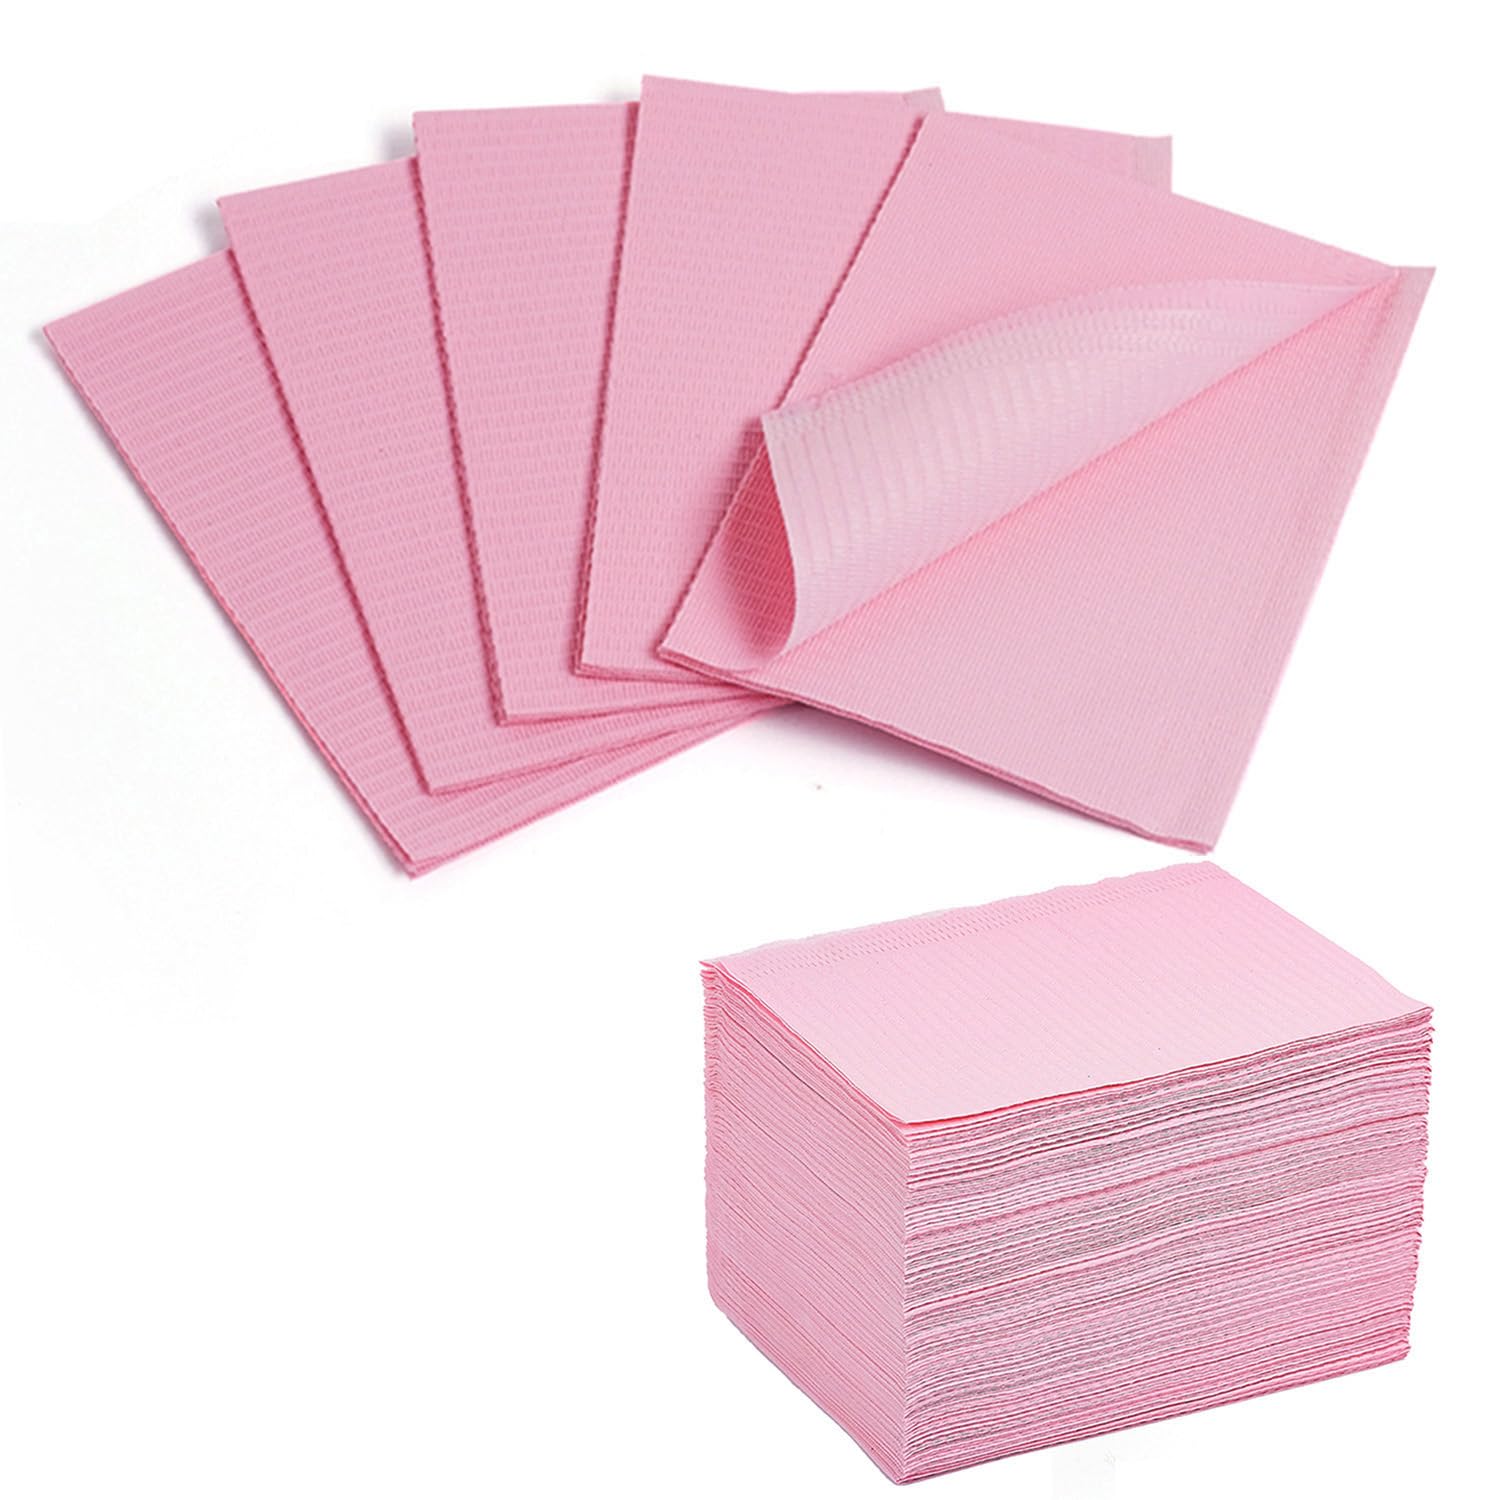 

20 Pcs Disposable Nail Mats, Pink Fordable Nail Paper Towels For Table Acrylic Nail Practice Sheet 3 Ply Waterproof Nail Art Table Mats Clean Pads For Salon Manicure Tattoo-pink